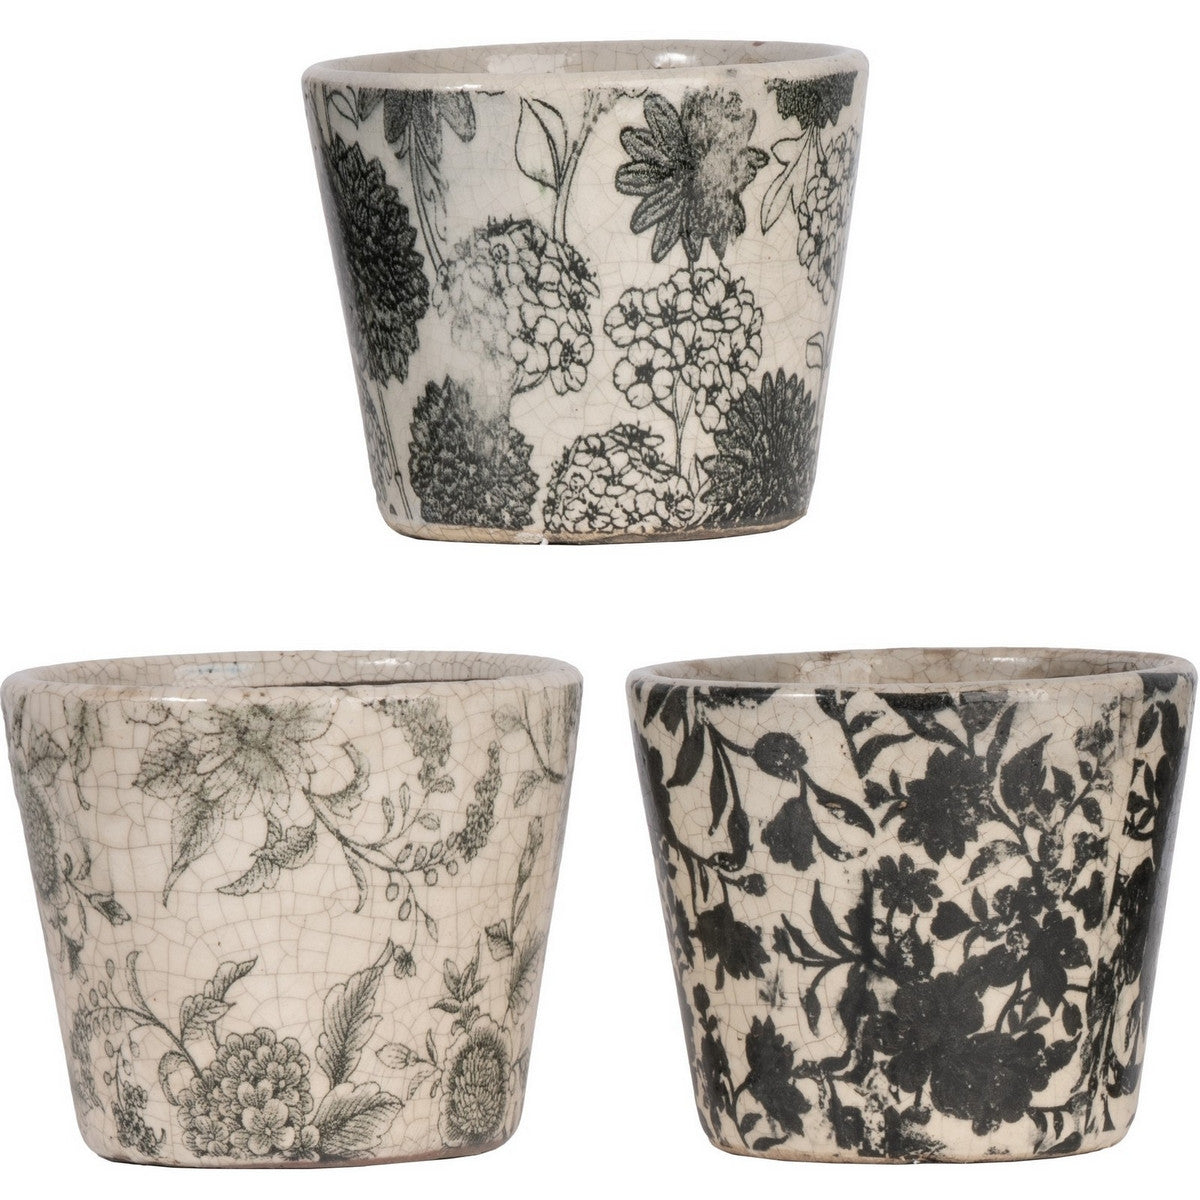 Planter - Black and White Floral - Assorted